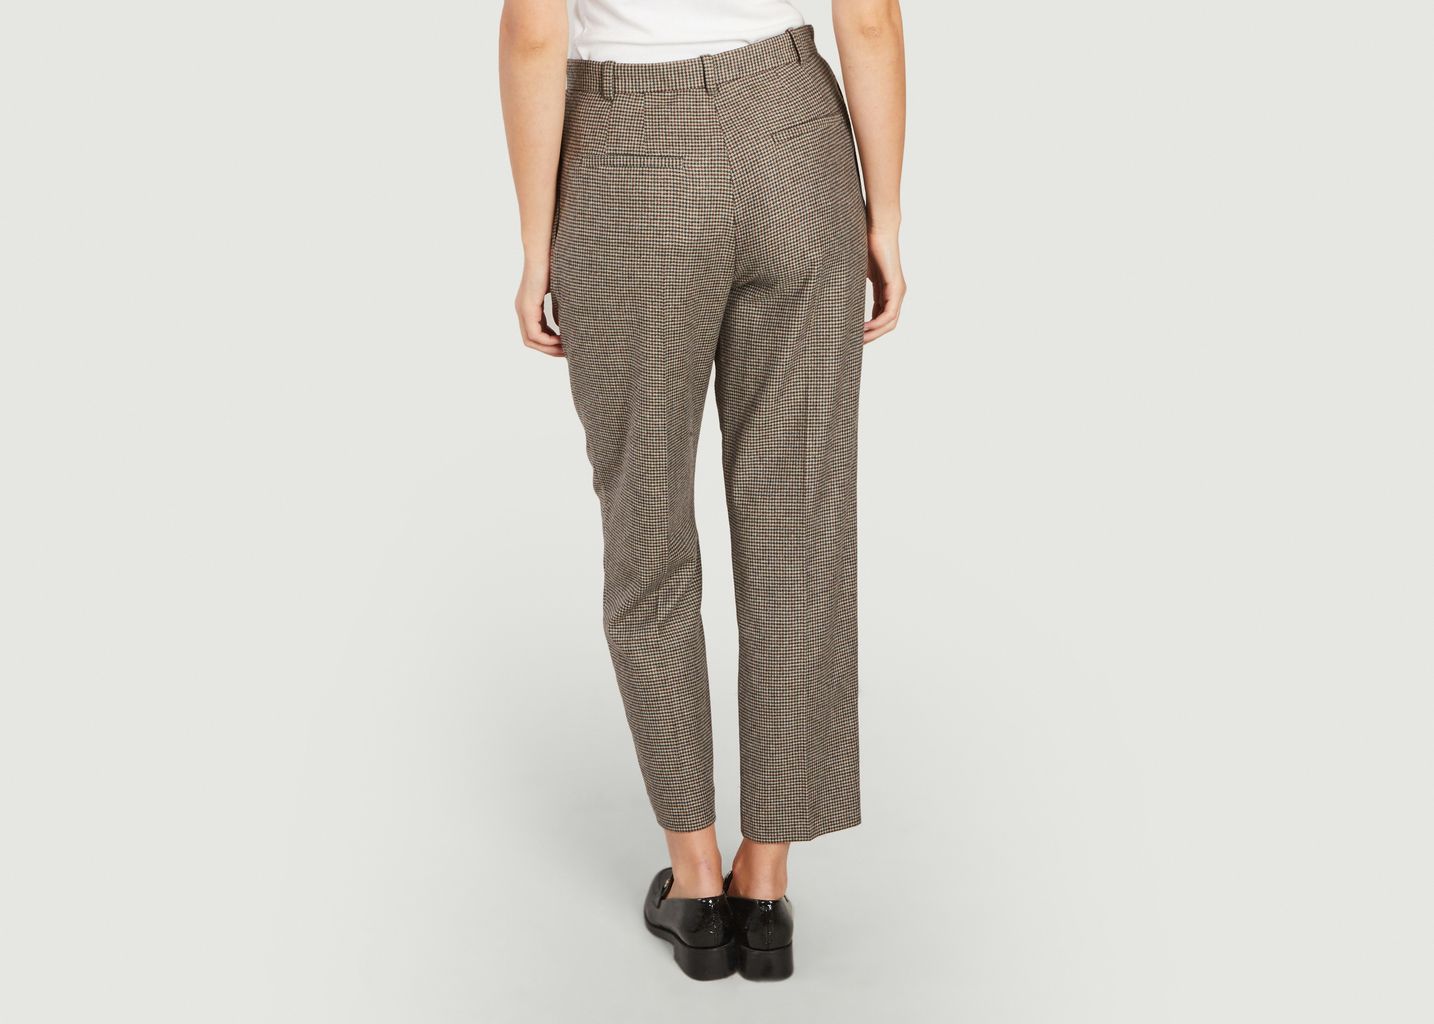 Hose mit hoher Taille Marion - A.P.C.